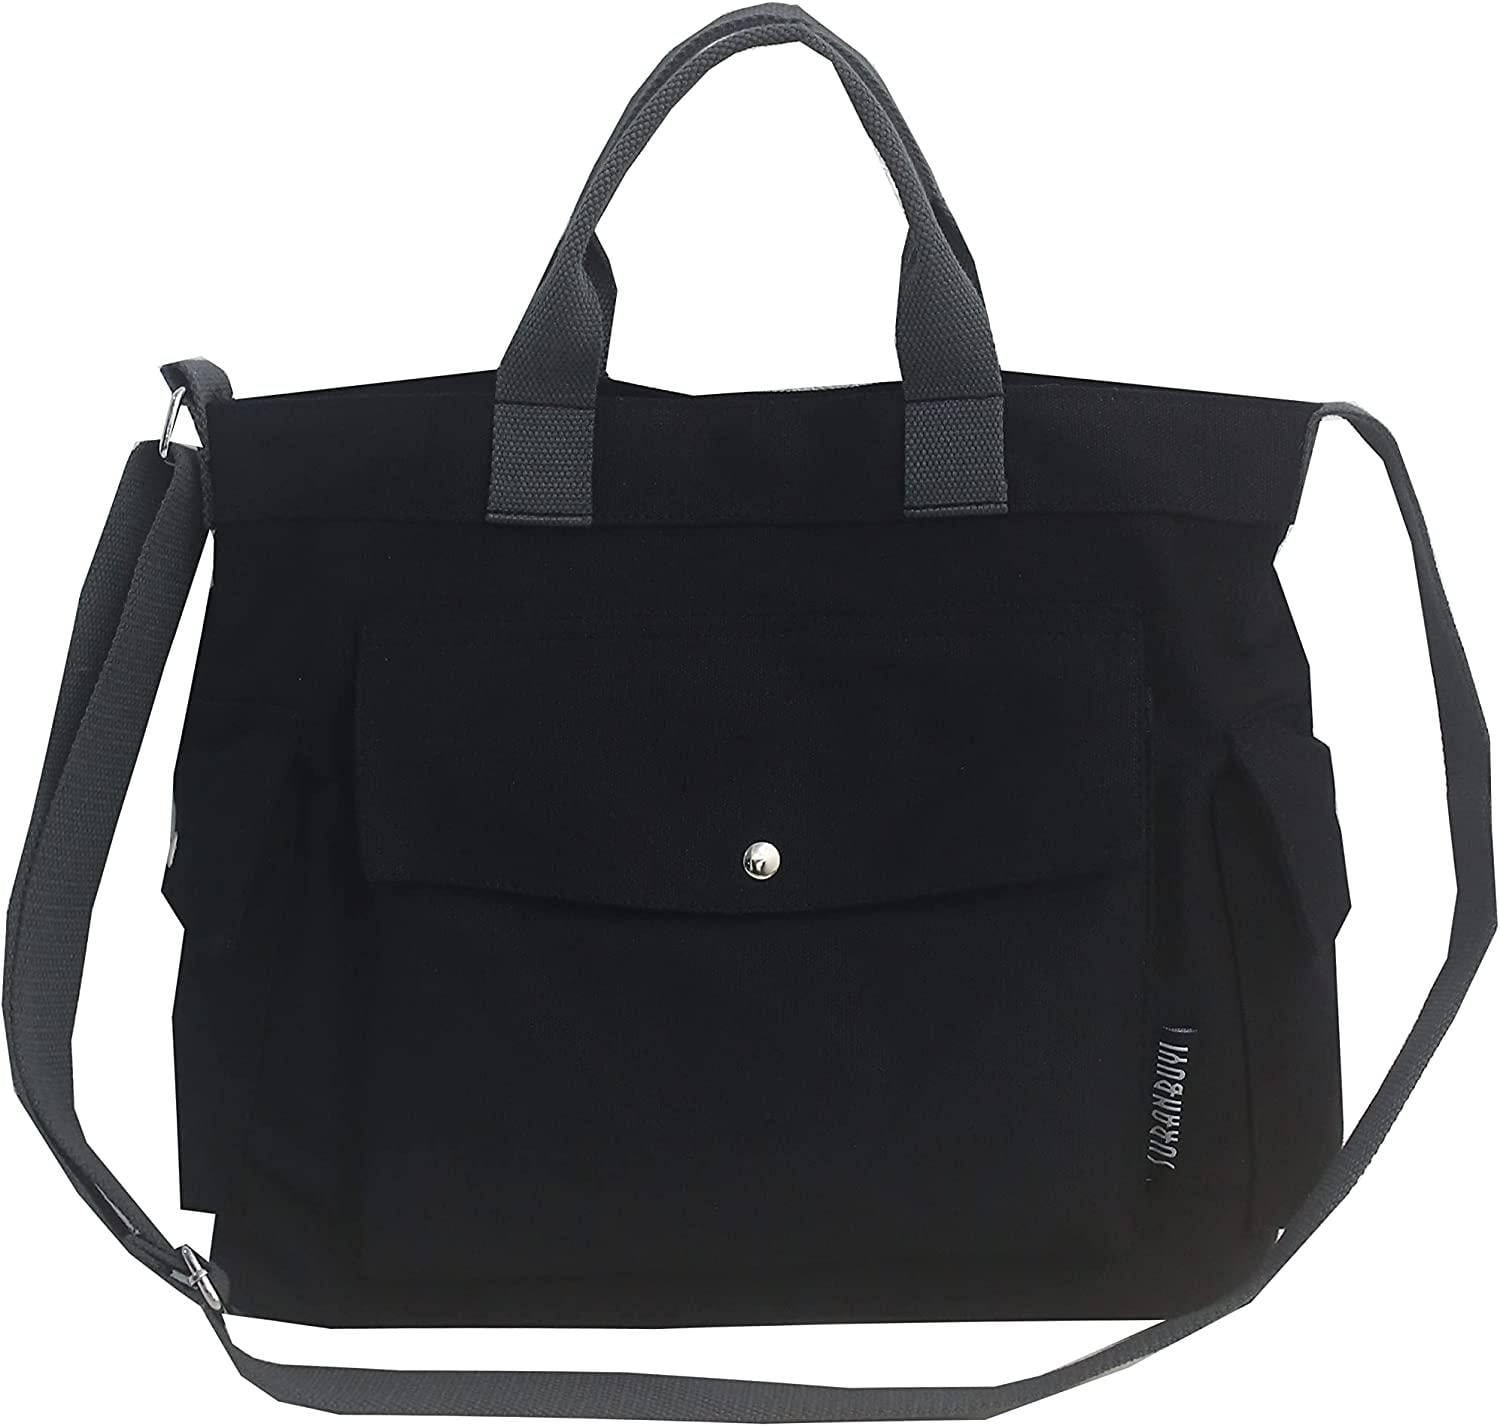 Accessories | CANVAS EXTRA LARGE TOTE BAG Natural - Stüssy Mens |  Underneath This